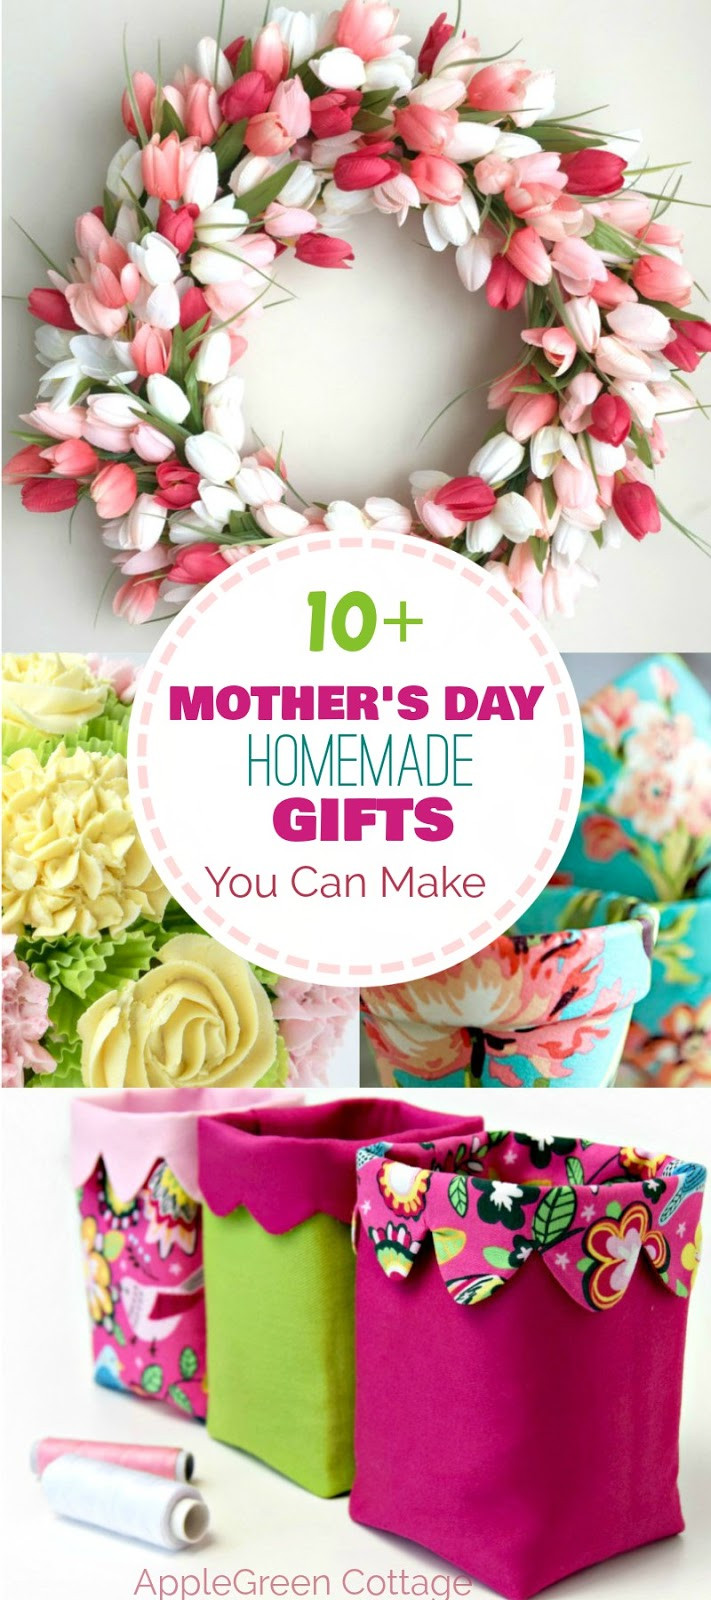 Mothers Day Gifts You Can Make
 10 Mother s Day Homemade Gifts You Can Make AppleGreen